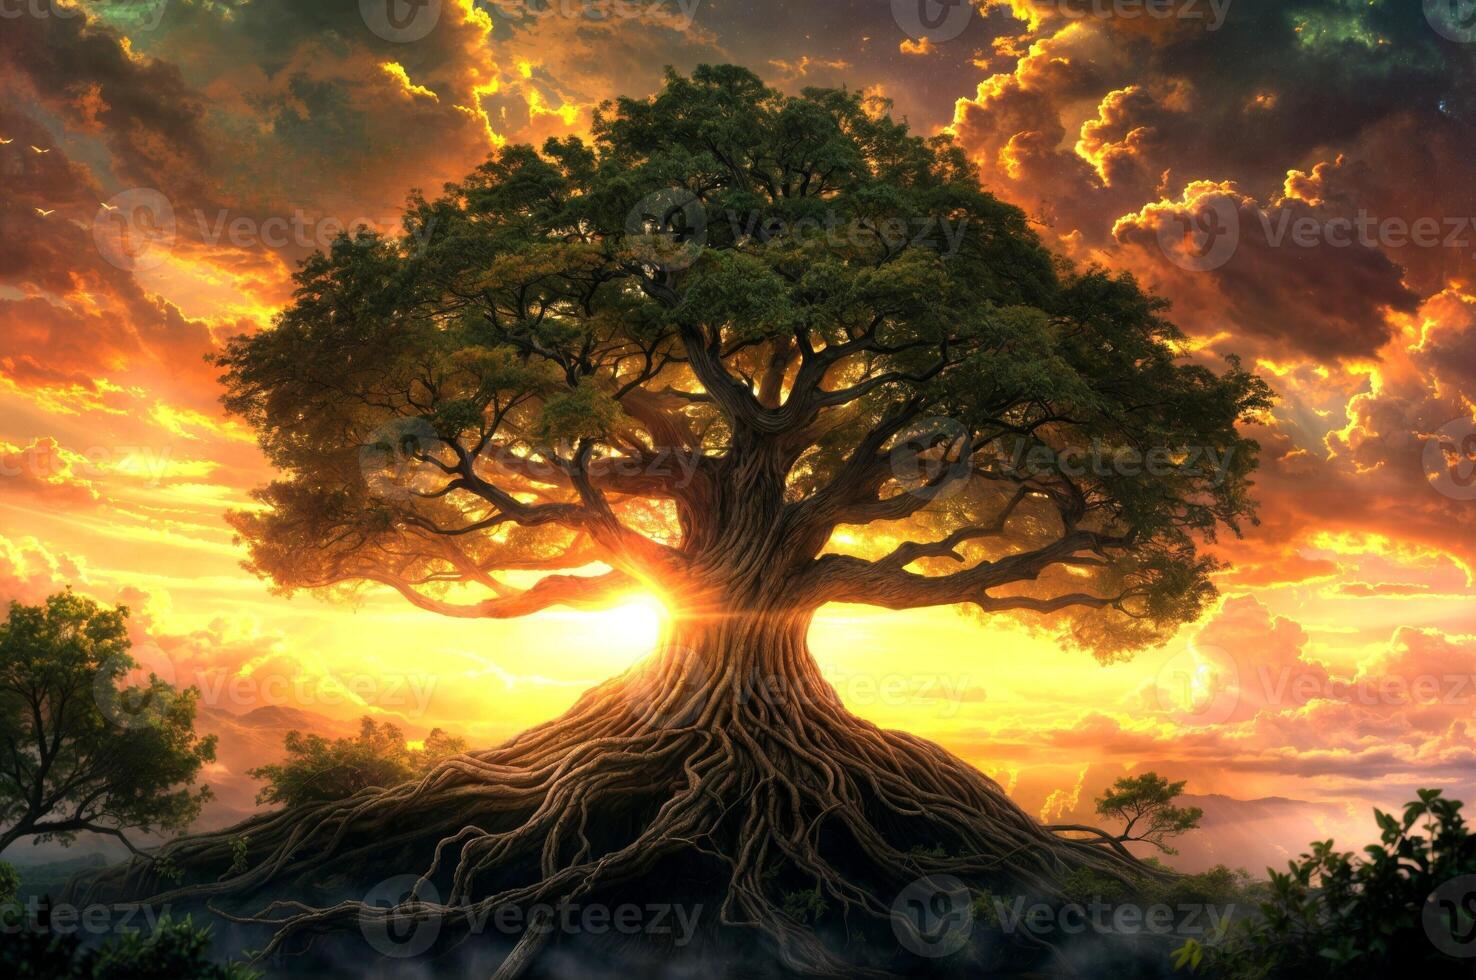 Majestic Yggdrasil tree of life rooted in Norse mythology and fantasy with ancient mystical roots photo